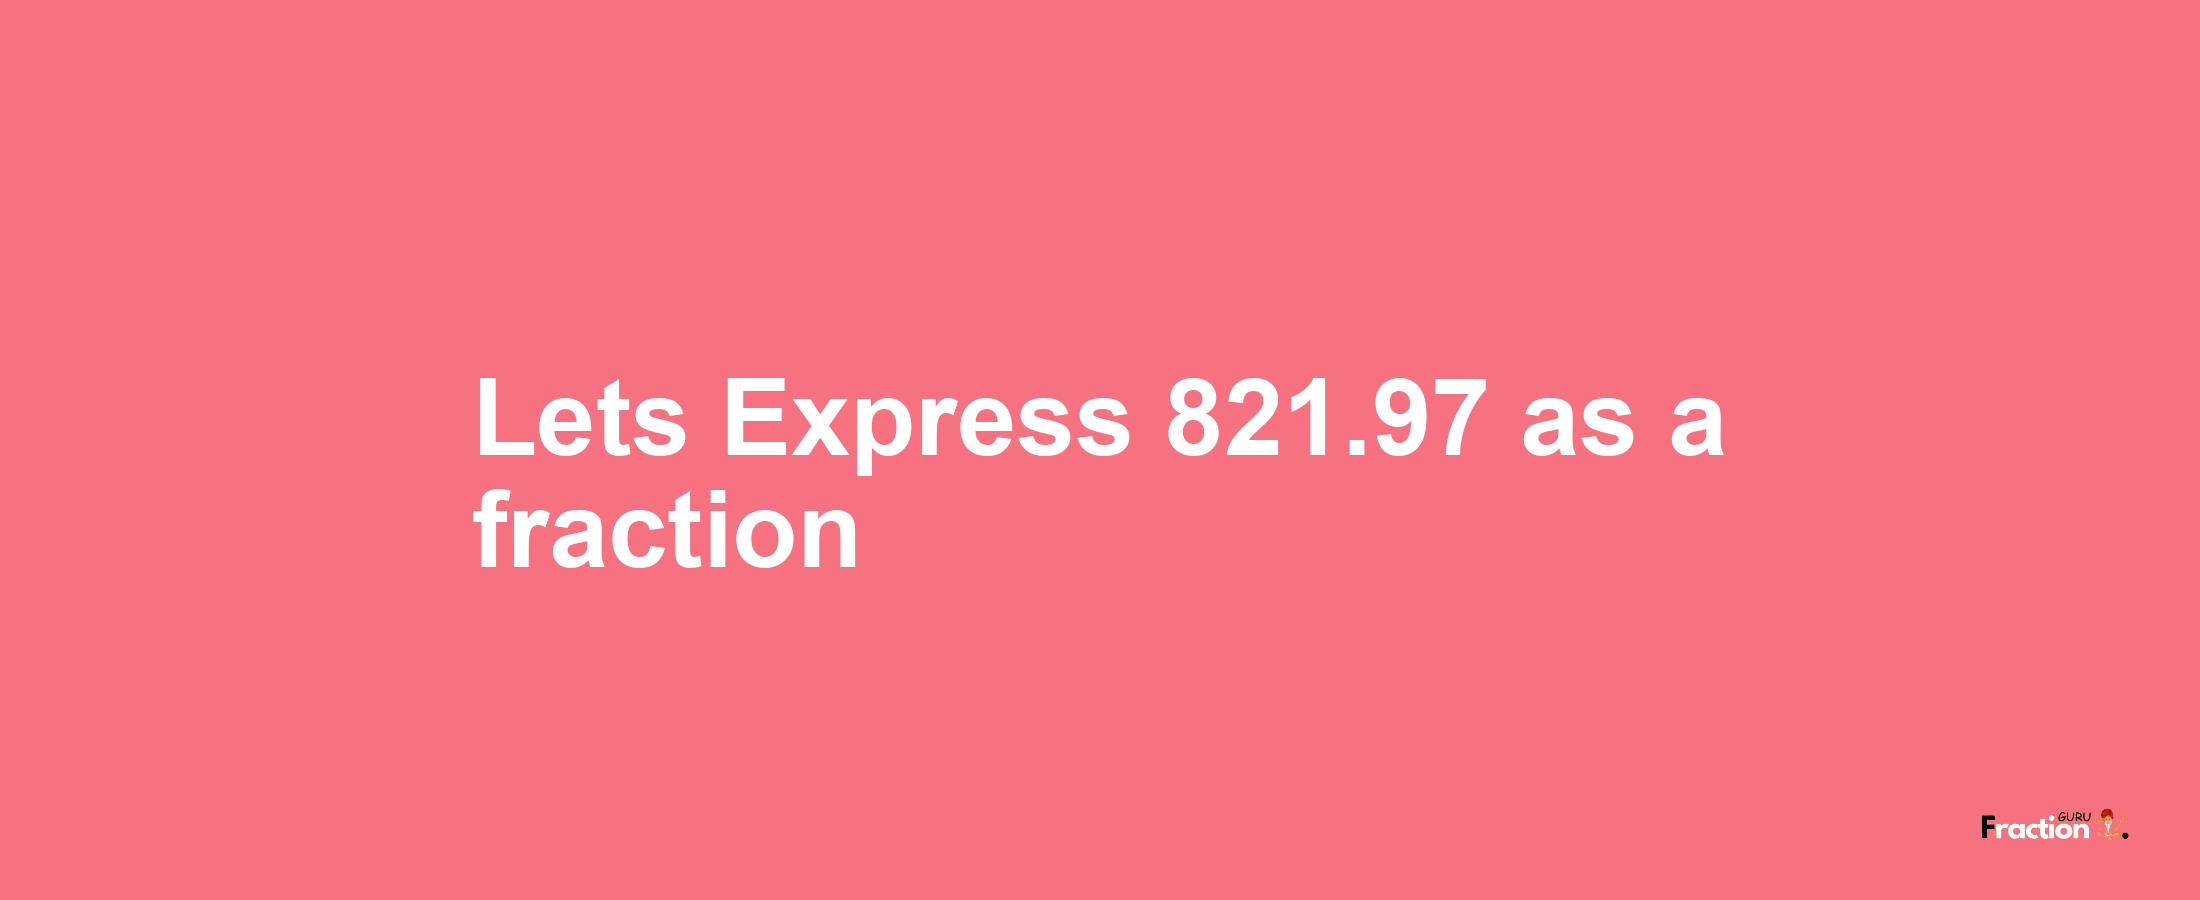 Lets Express 821.97 as afraction